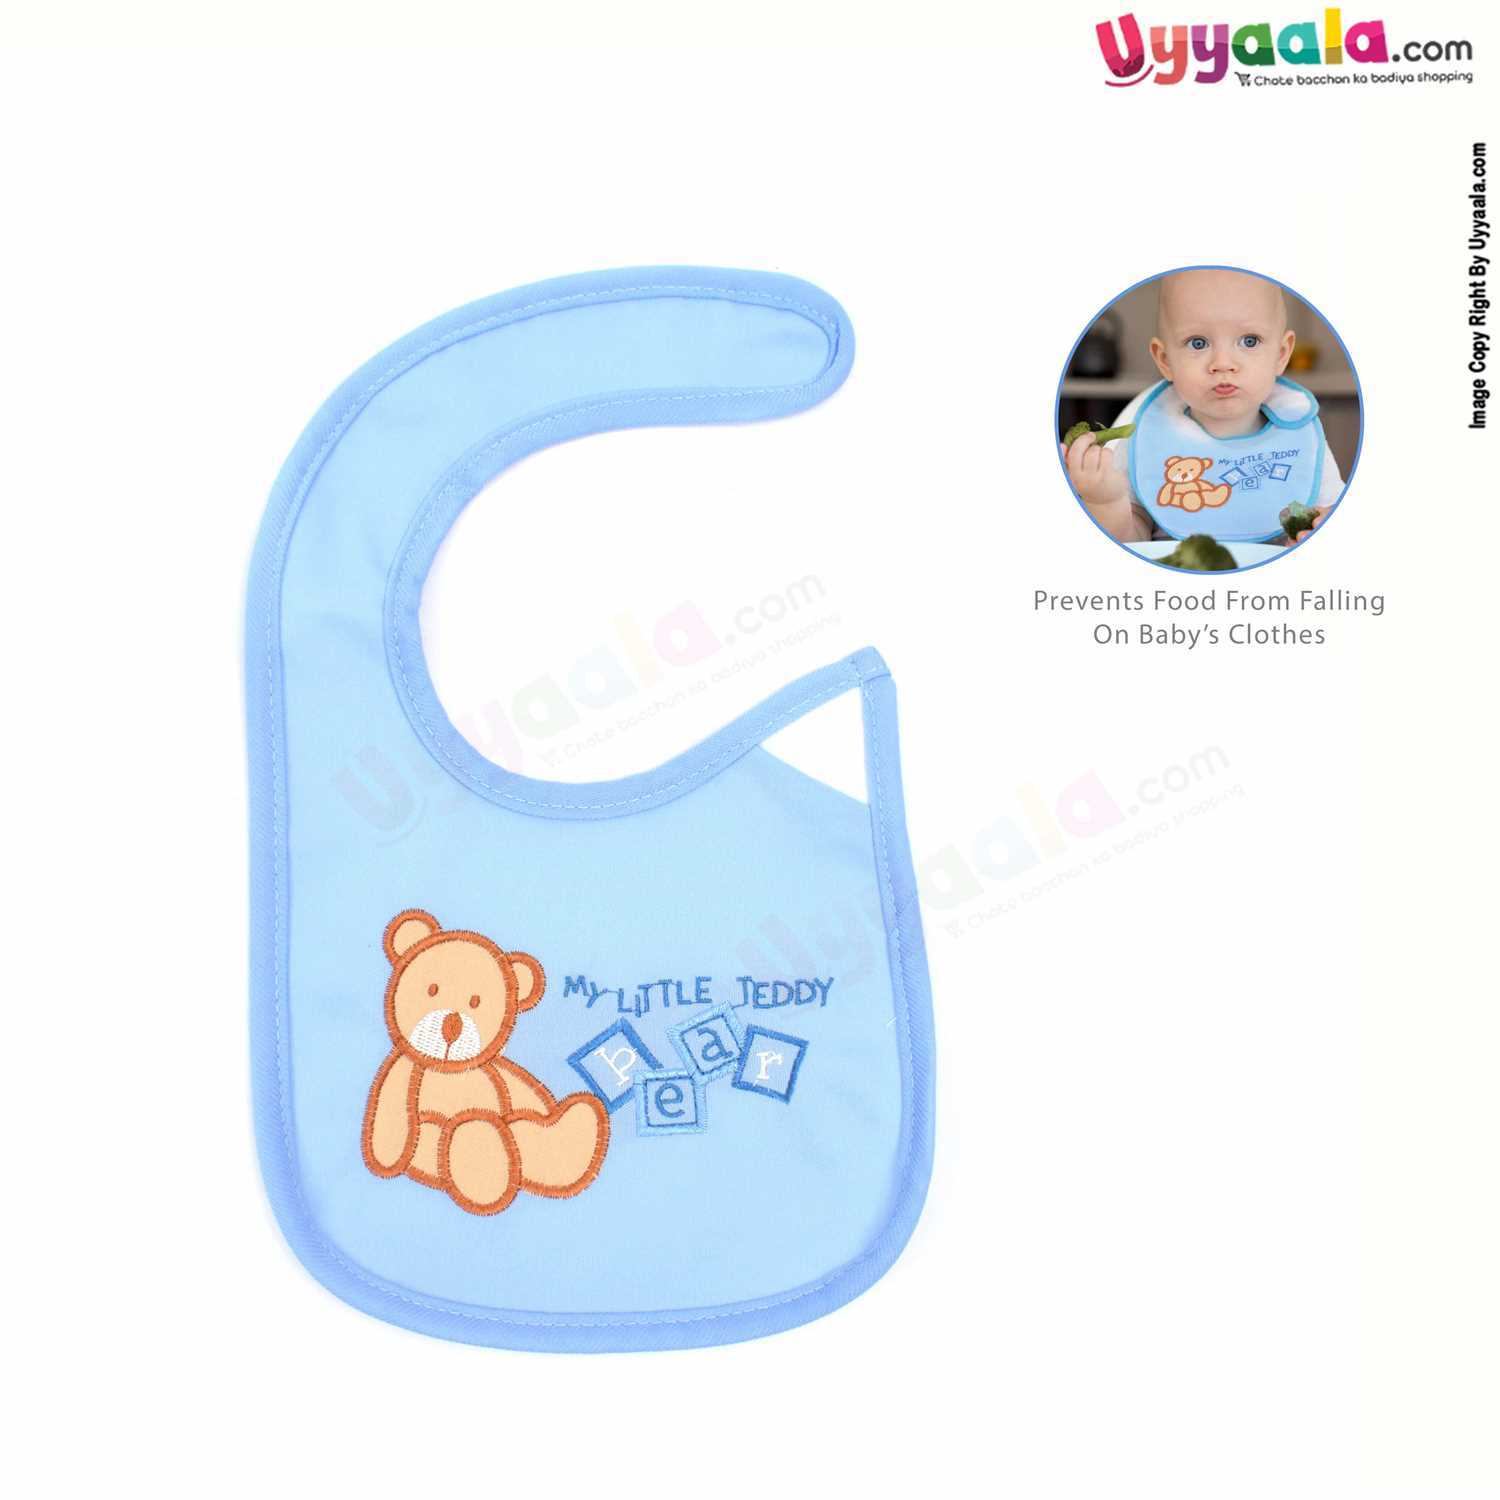 Baby Bib One Side Soft Cotton Hosiery & Another Side Pvc with Bear Print